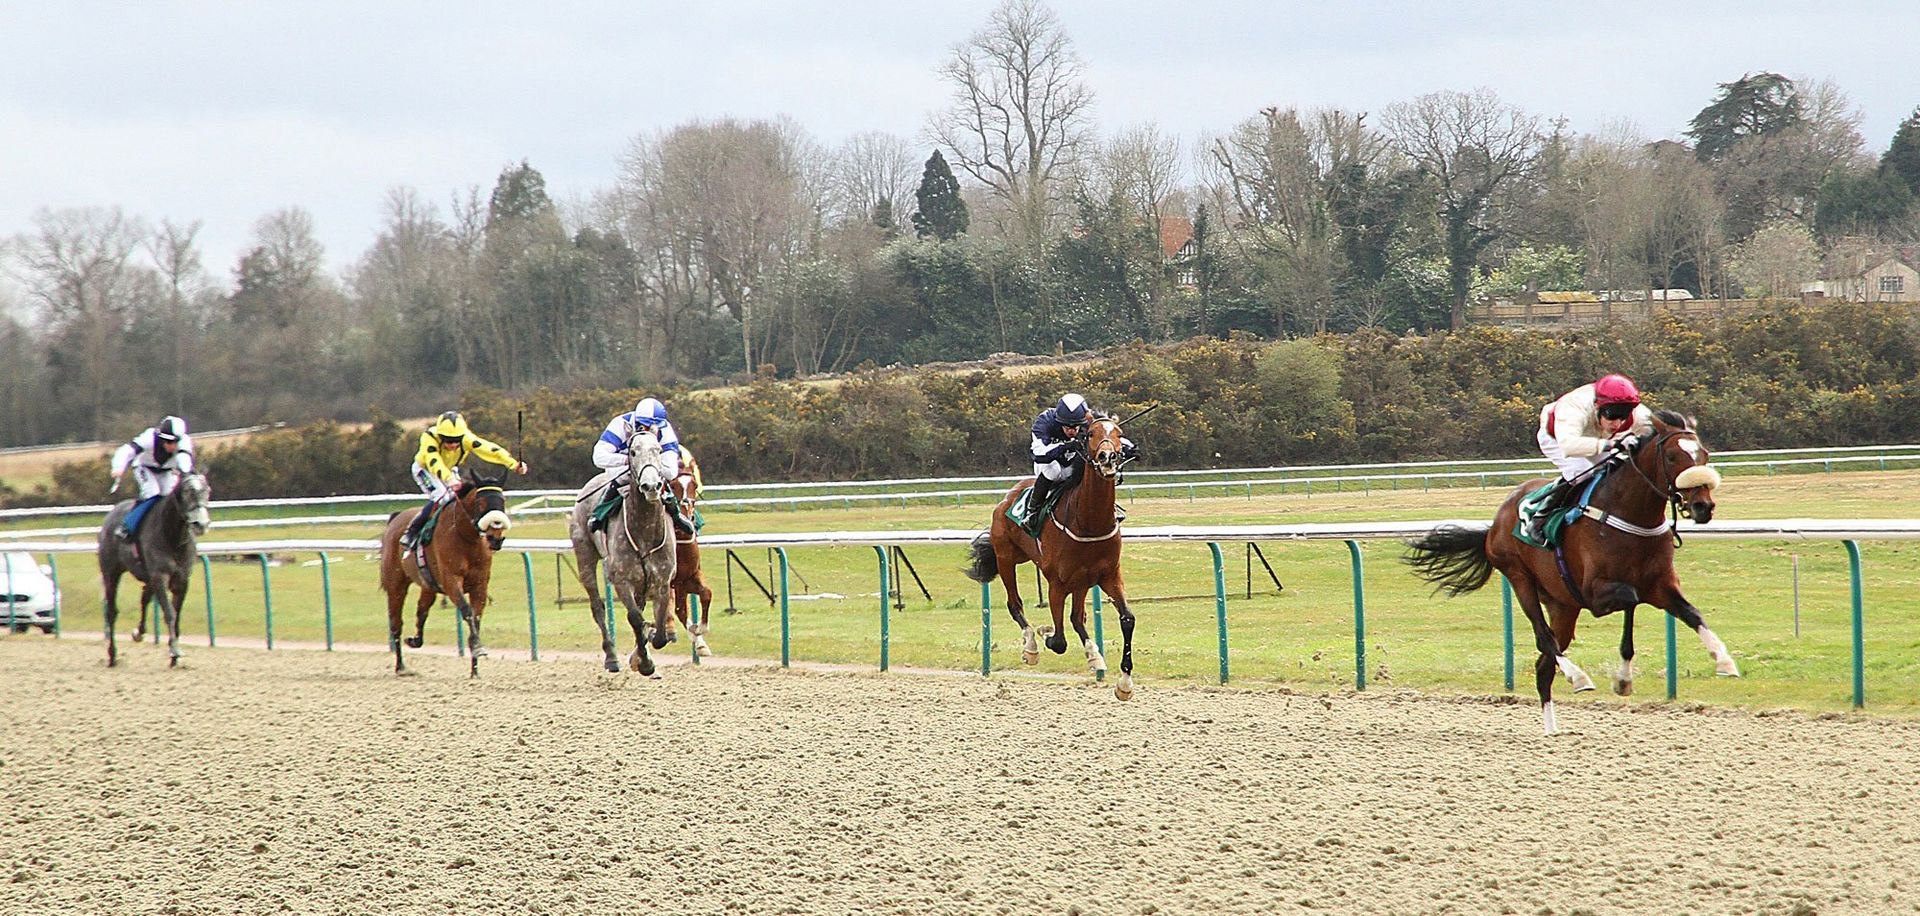 Force of Destiny wins at Lingfield Park